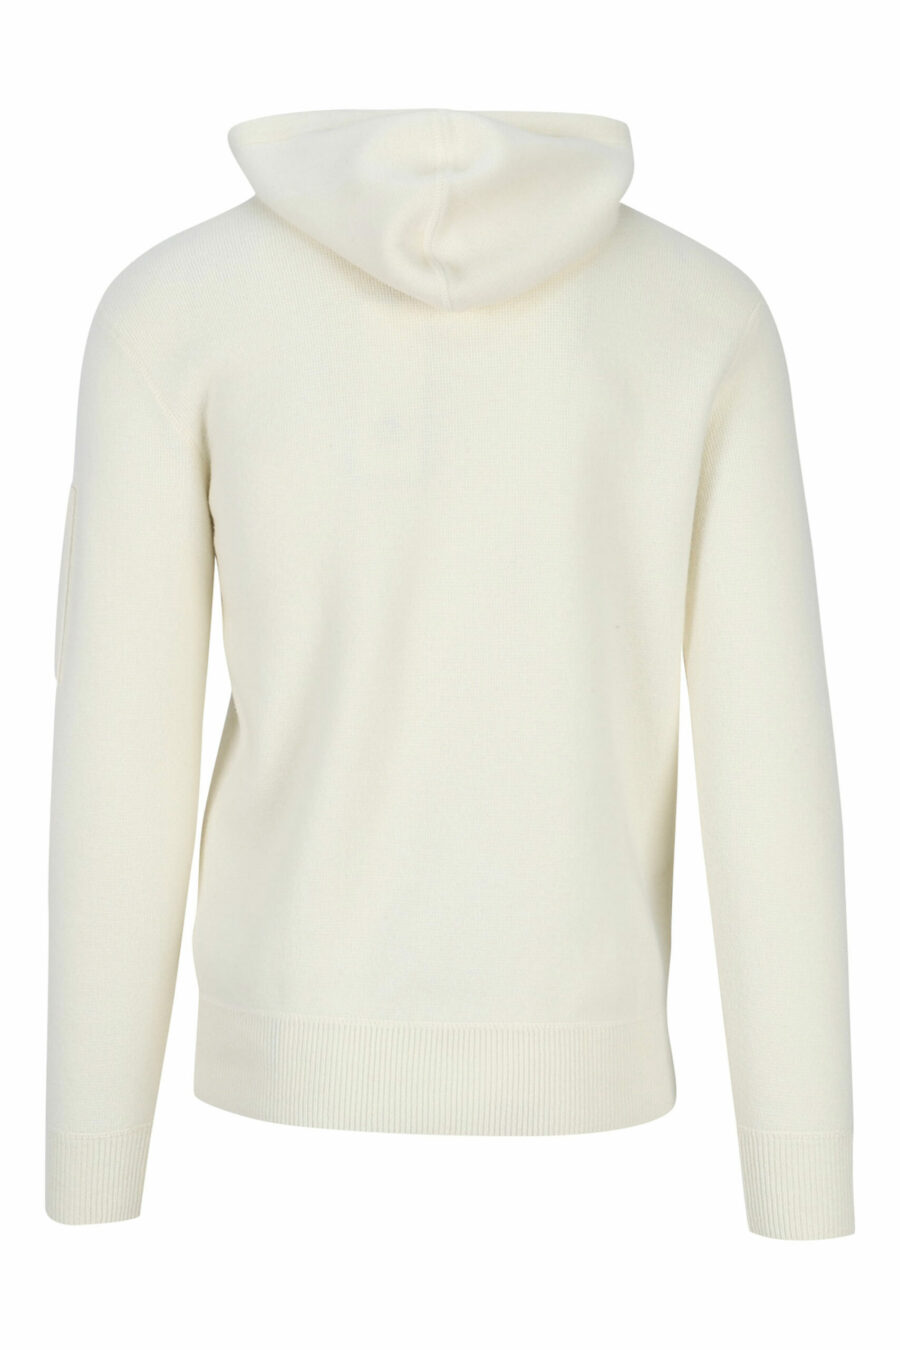 White hooded sweatshirt with side lens logo - 7620943634068 2 scaled